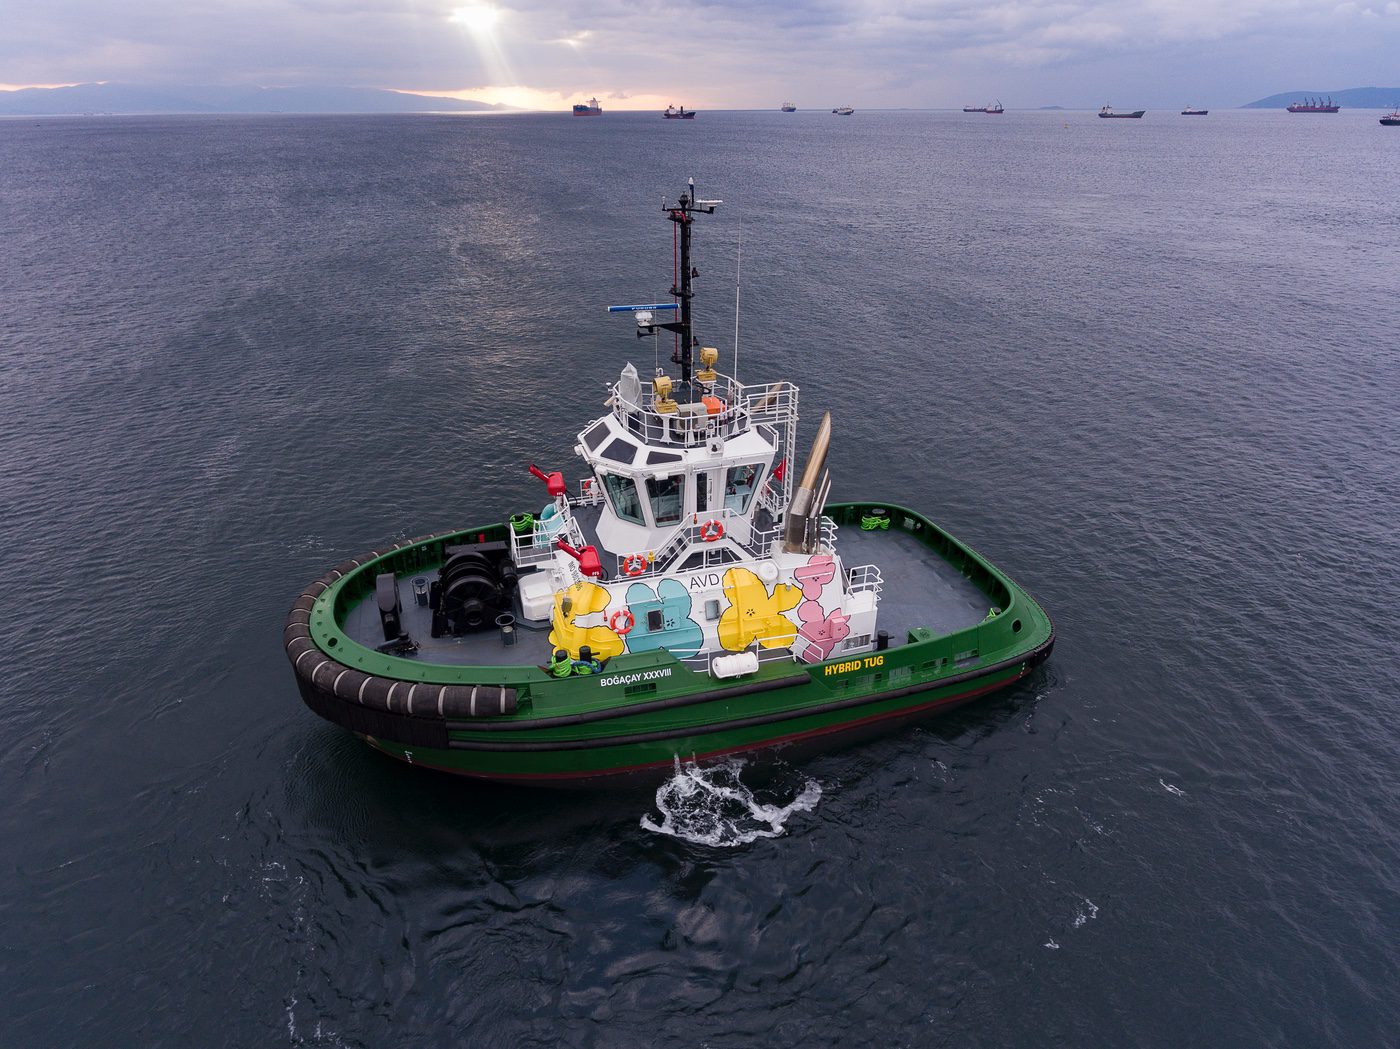 “Flower Power” from Sanmar and Robert Allan Ltd. – 200 Tugs and Counting…